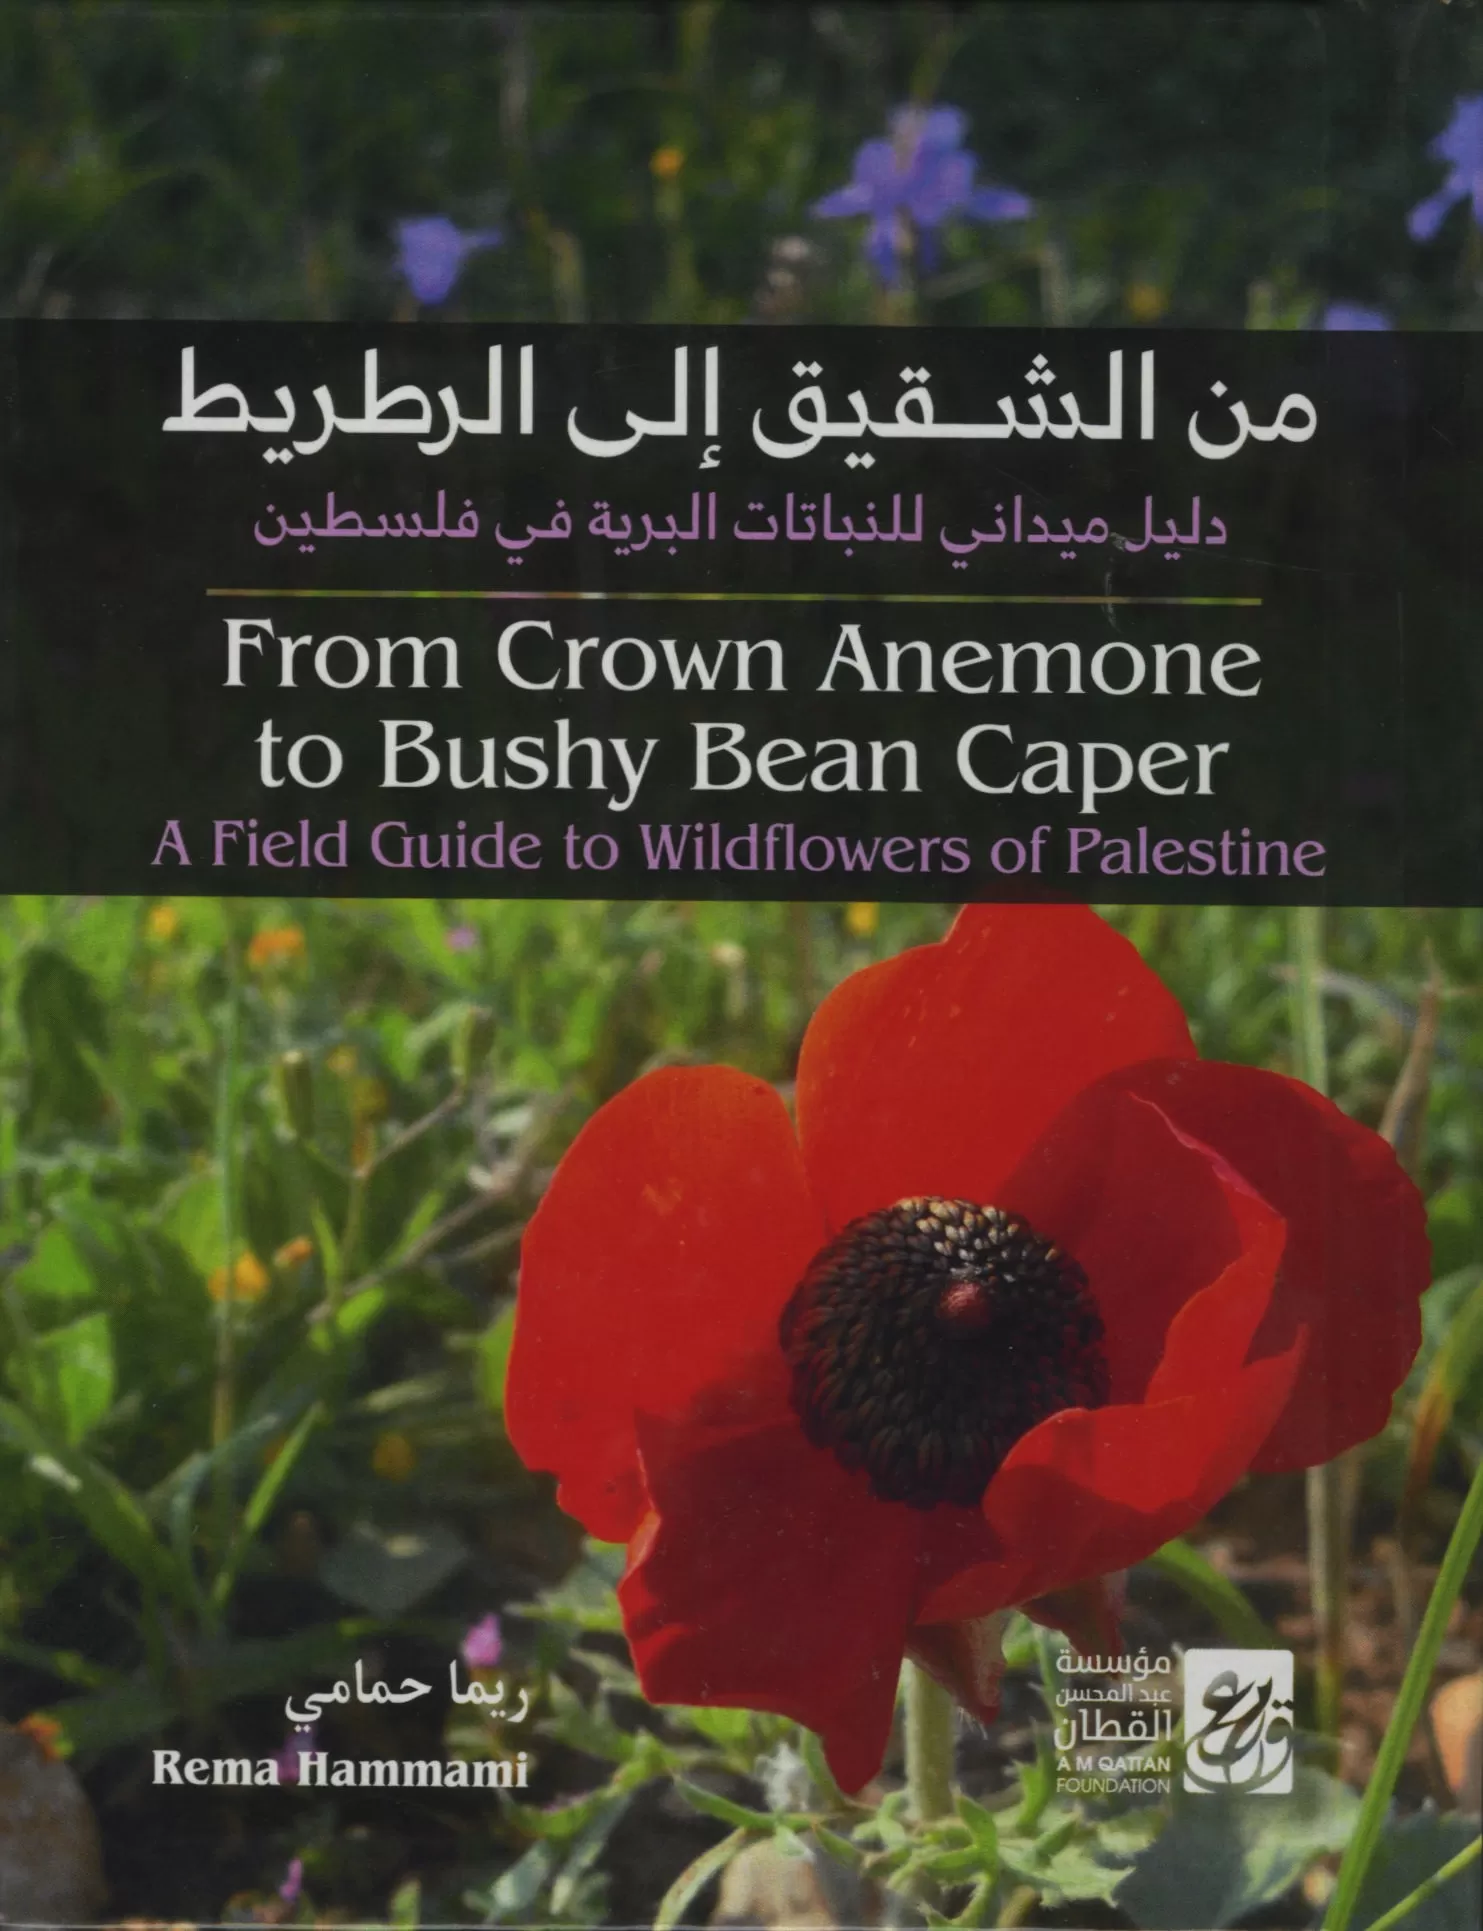 From Crown Anemone to Bushy Bean Caper